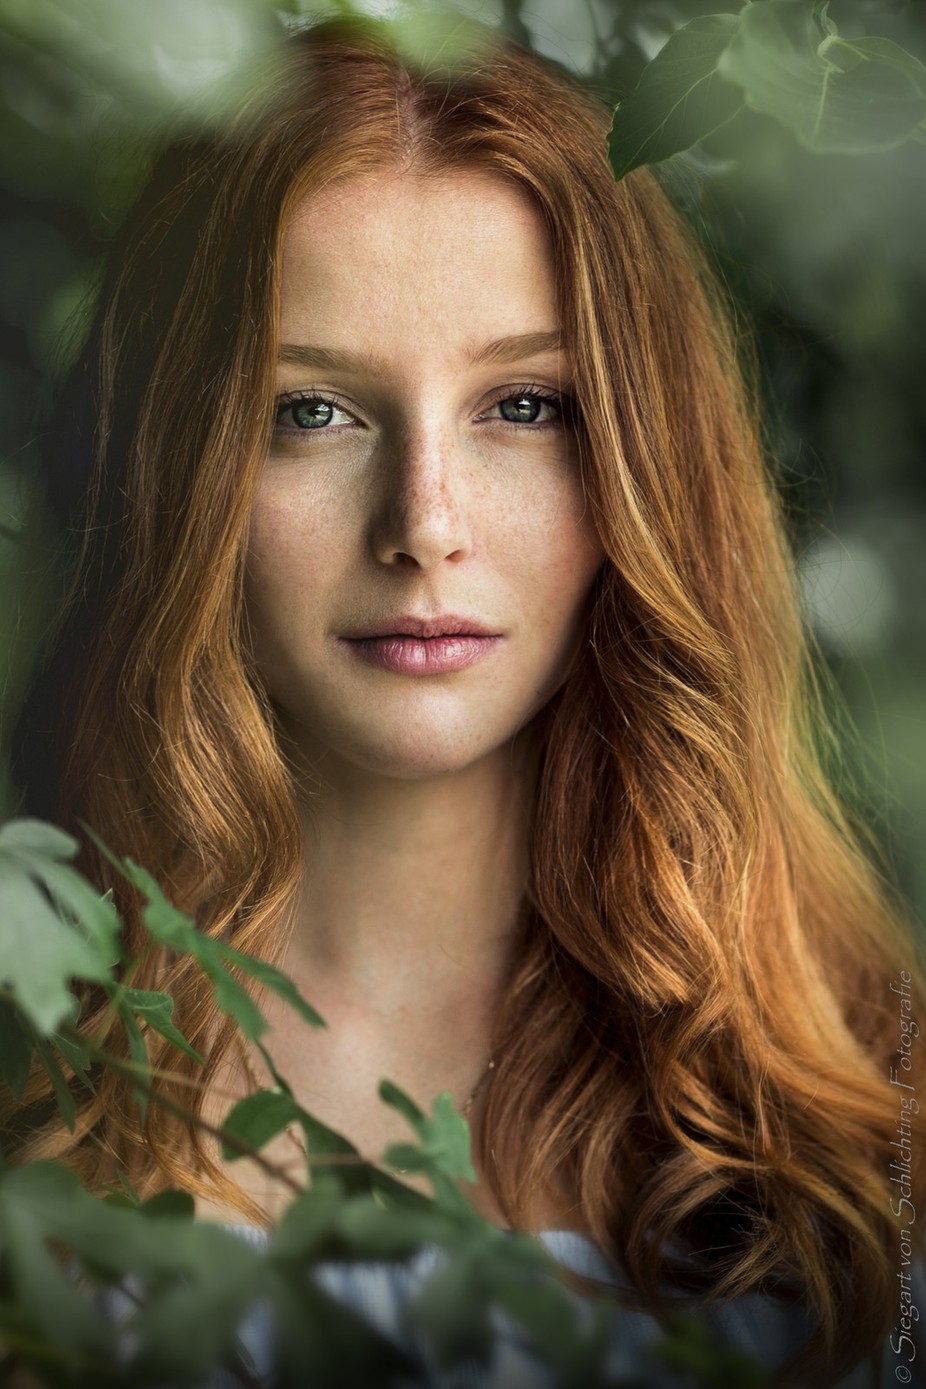 Mona  by siegart - Faces With Freckles Photo Contest